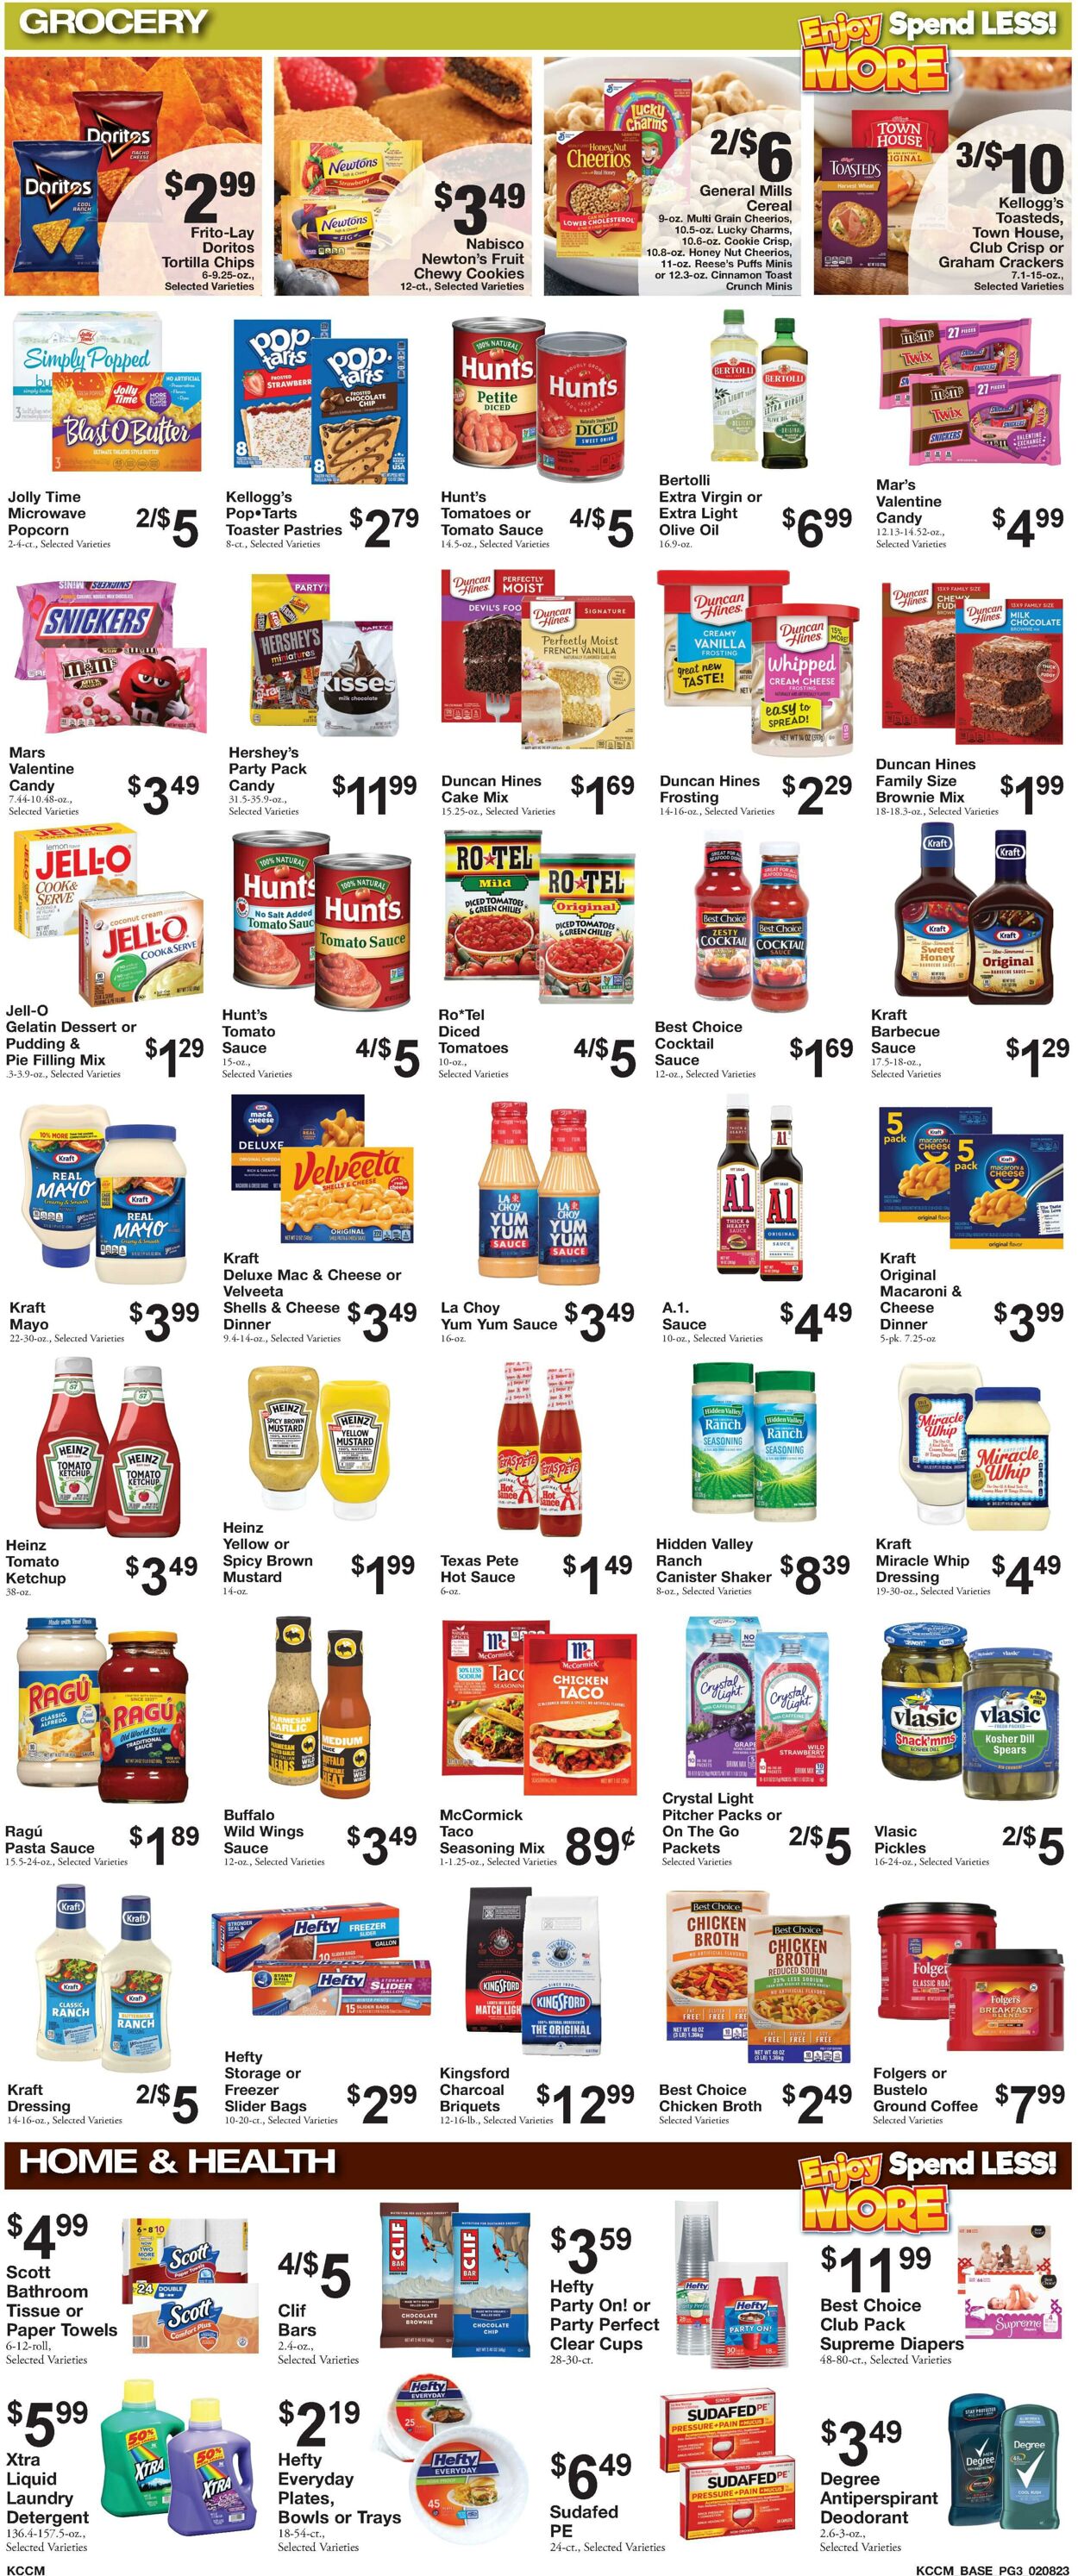 Weekly ad Country Mart 02/08/2023 - 02/14/2023